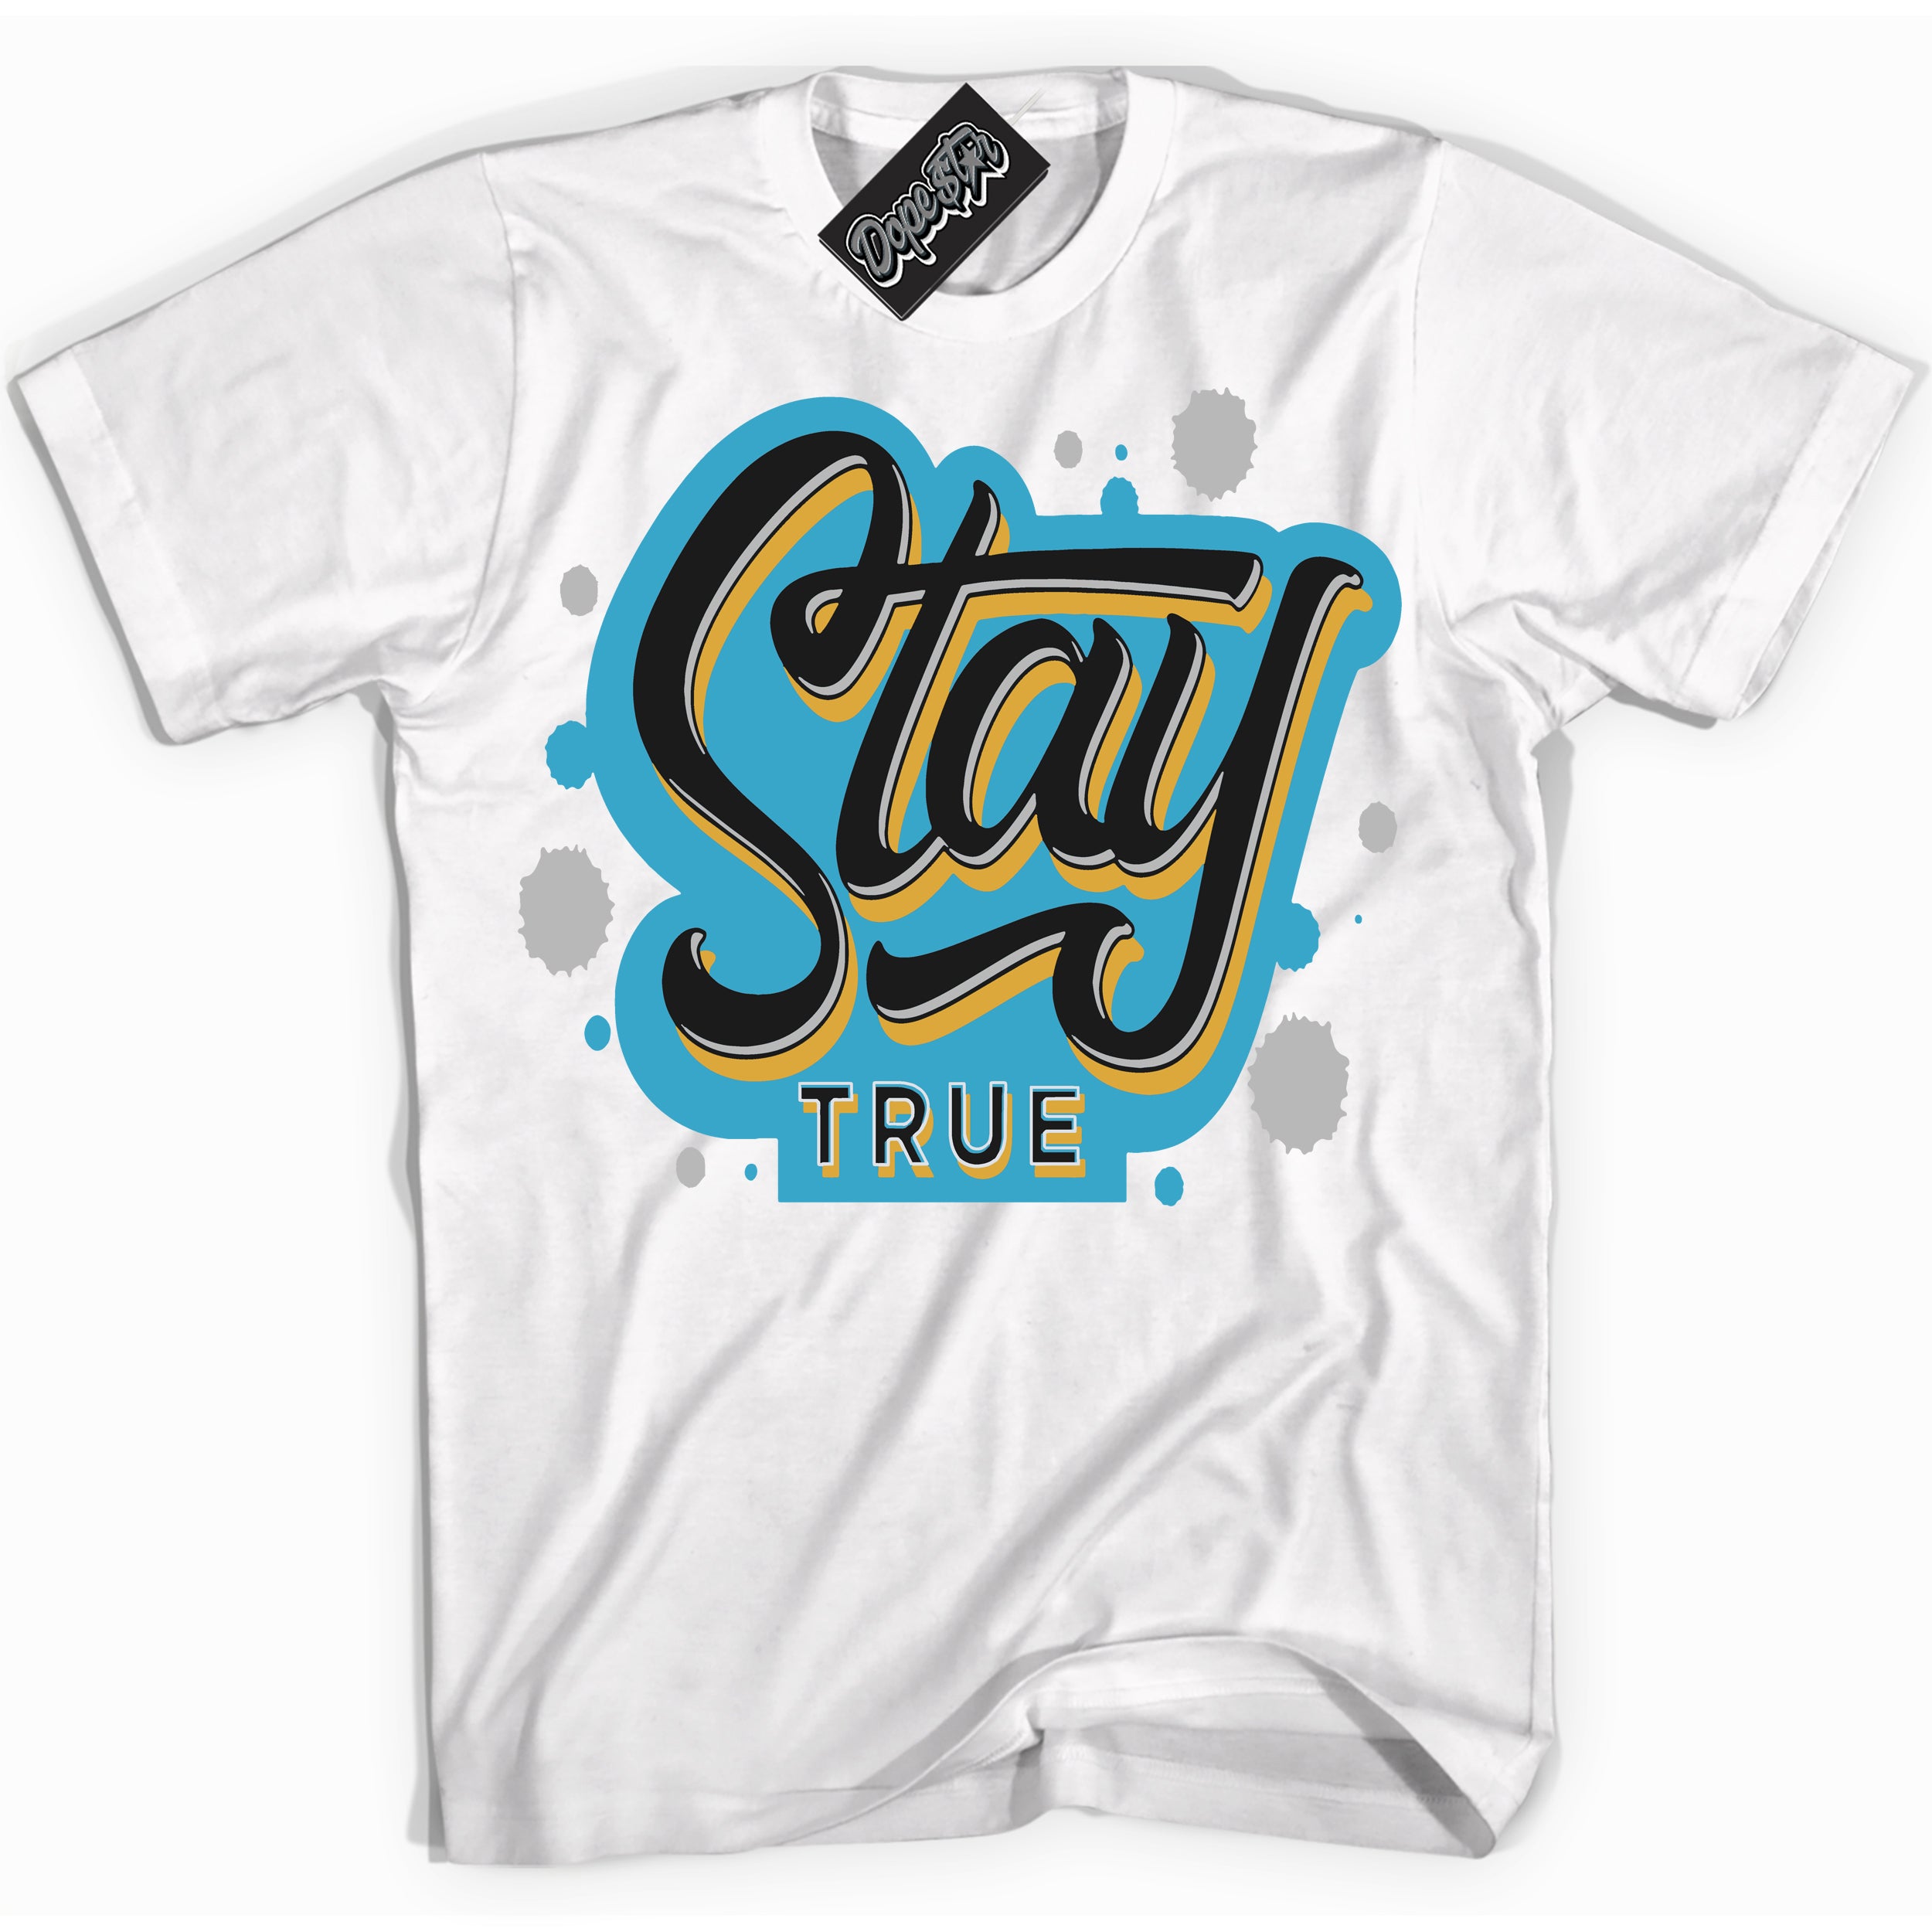 Cool White Shirt with “ Stay True” design that perfectly matches Aqua 5s Sneakers.